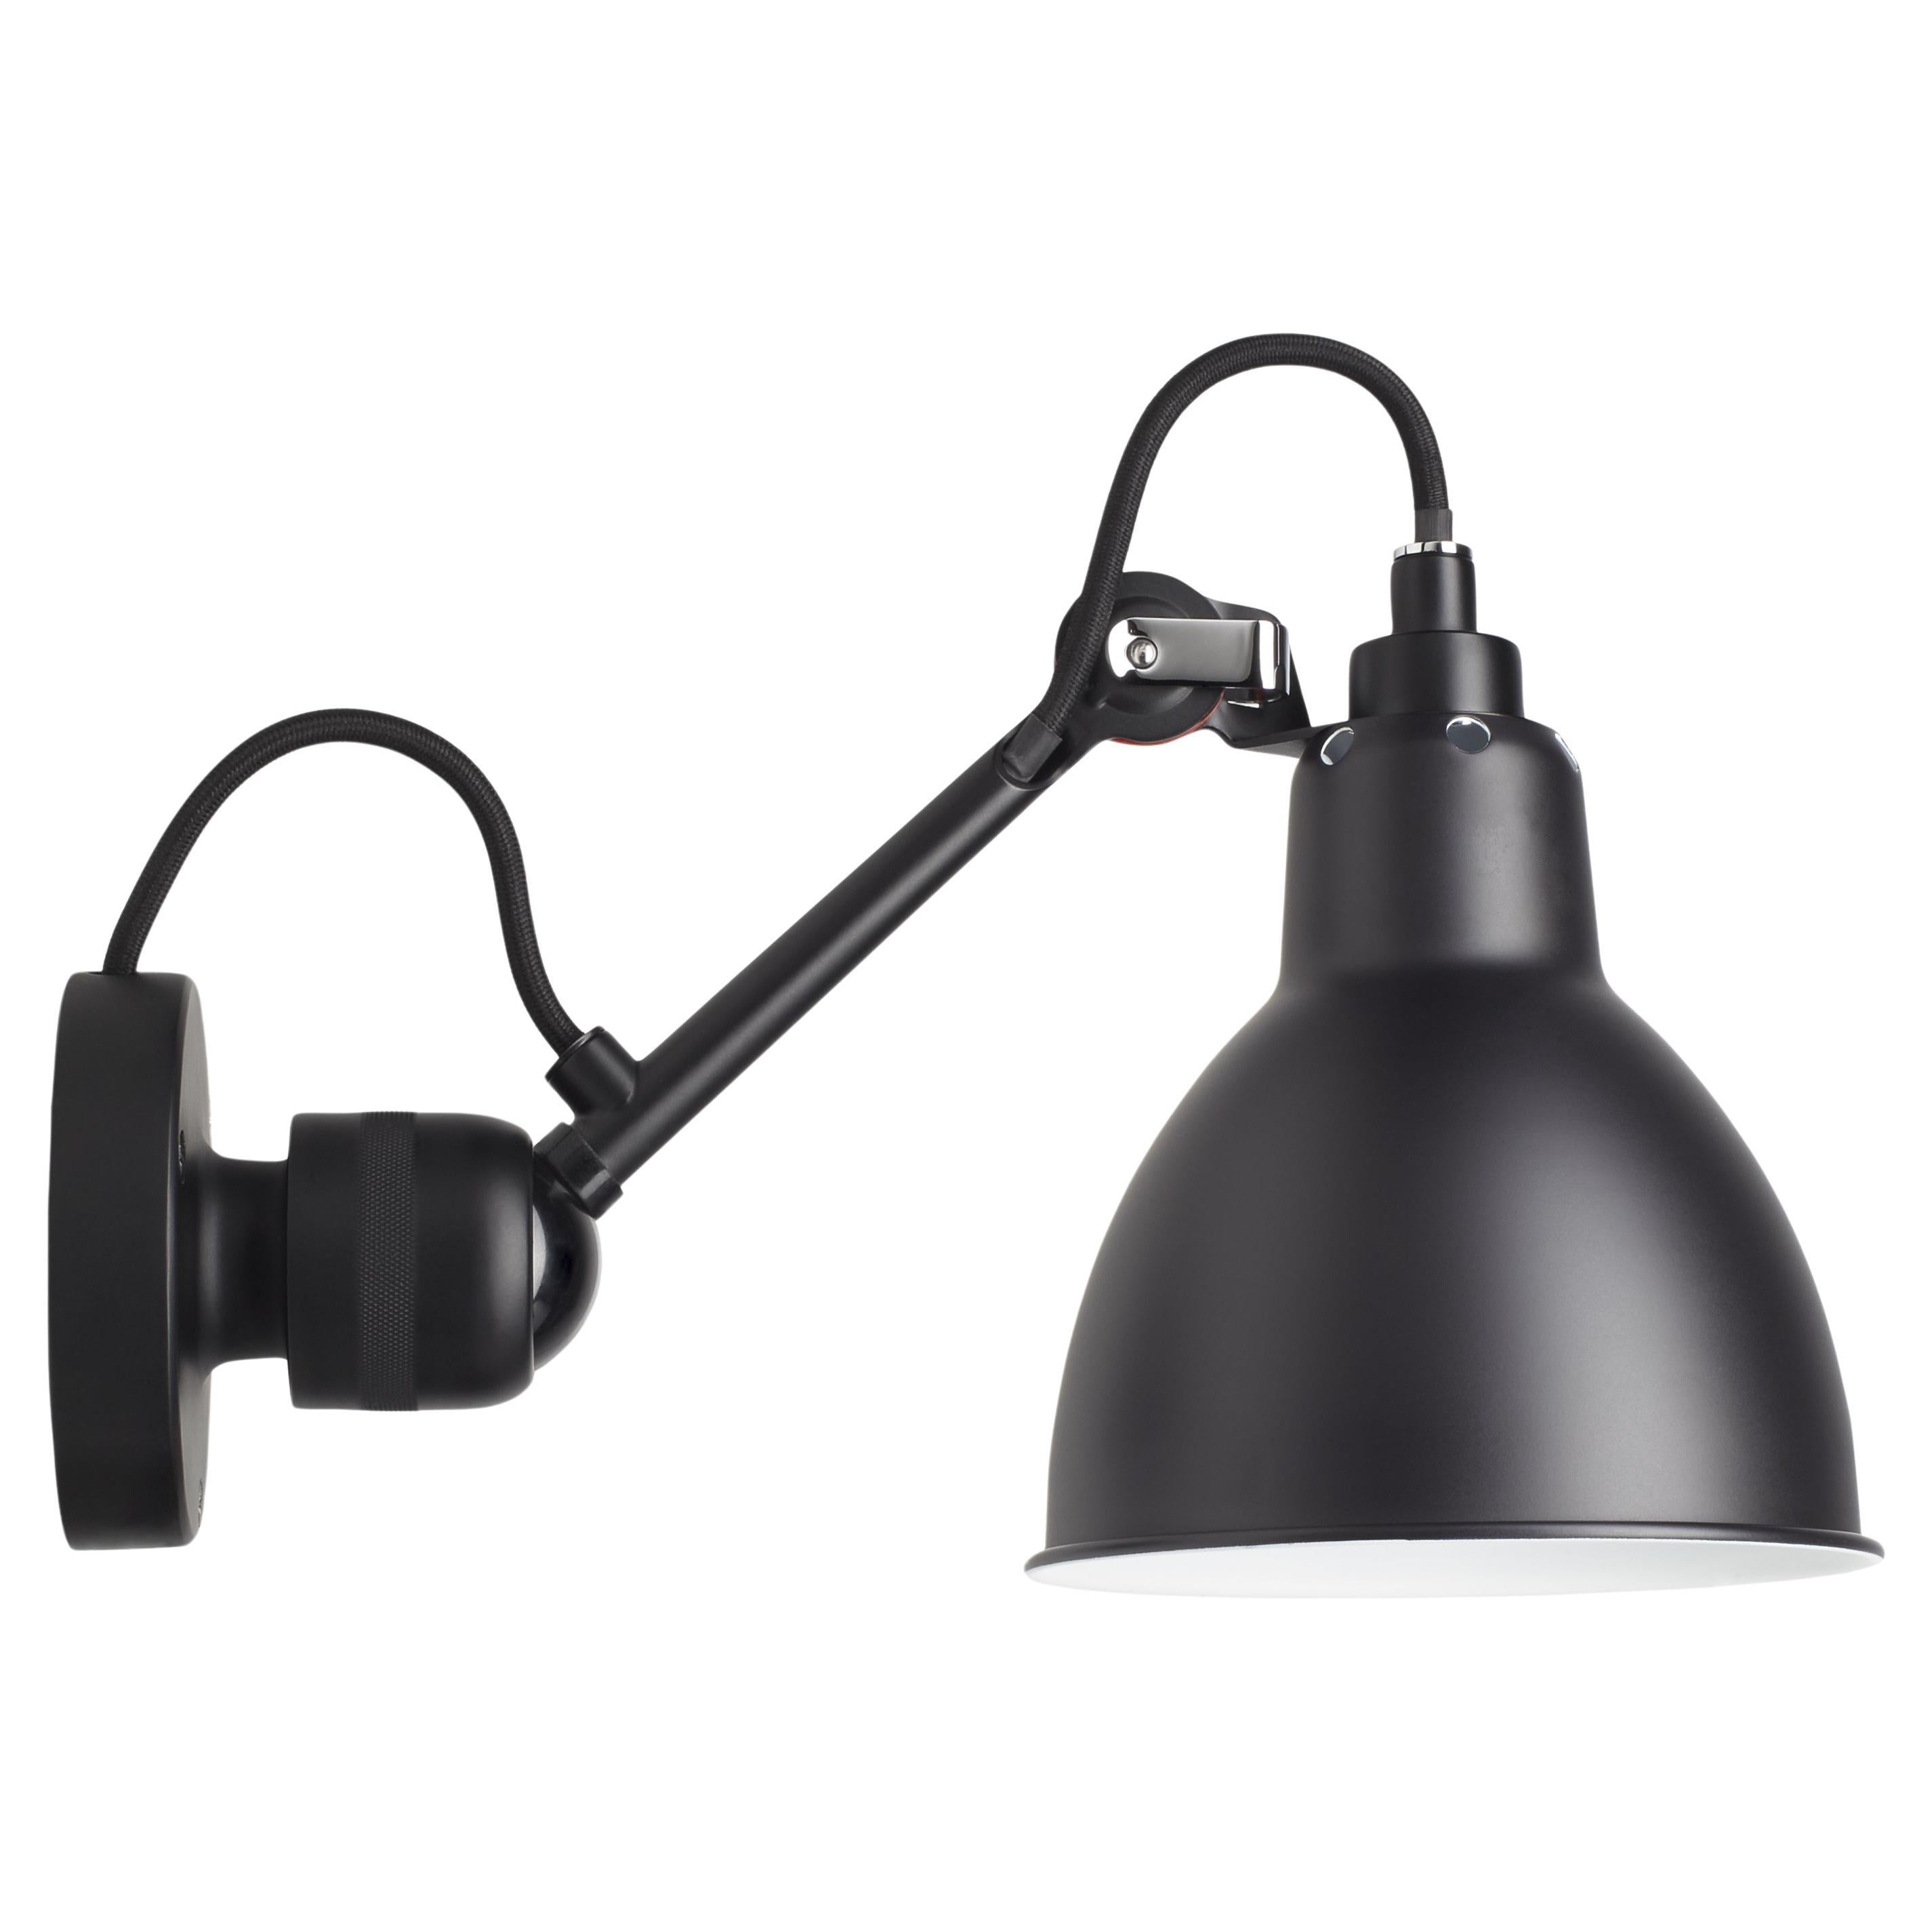 DCW Editions La Lampe Gras N°304 Wall Lamp in Black Arm and Black Shade For Sale